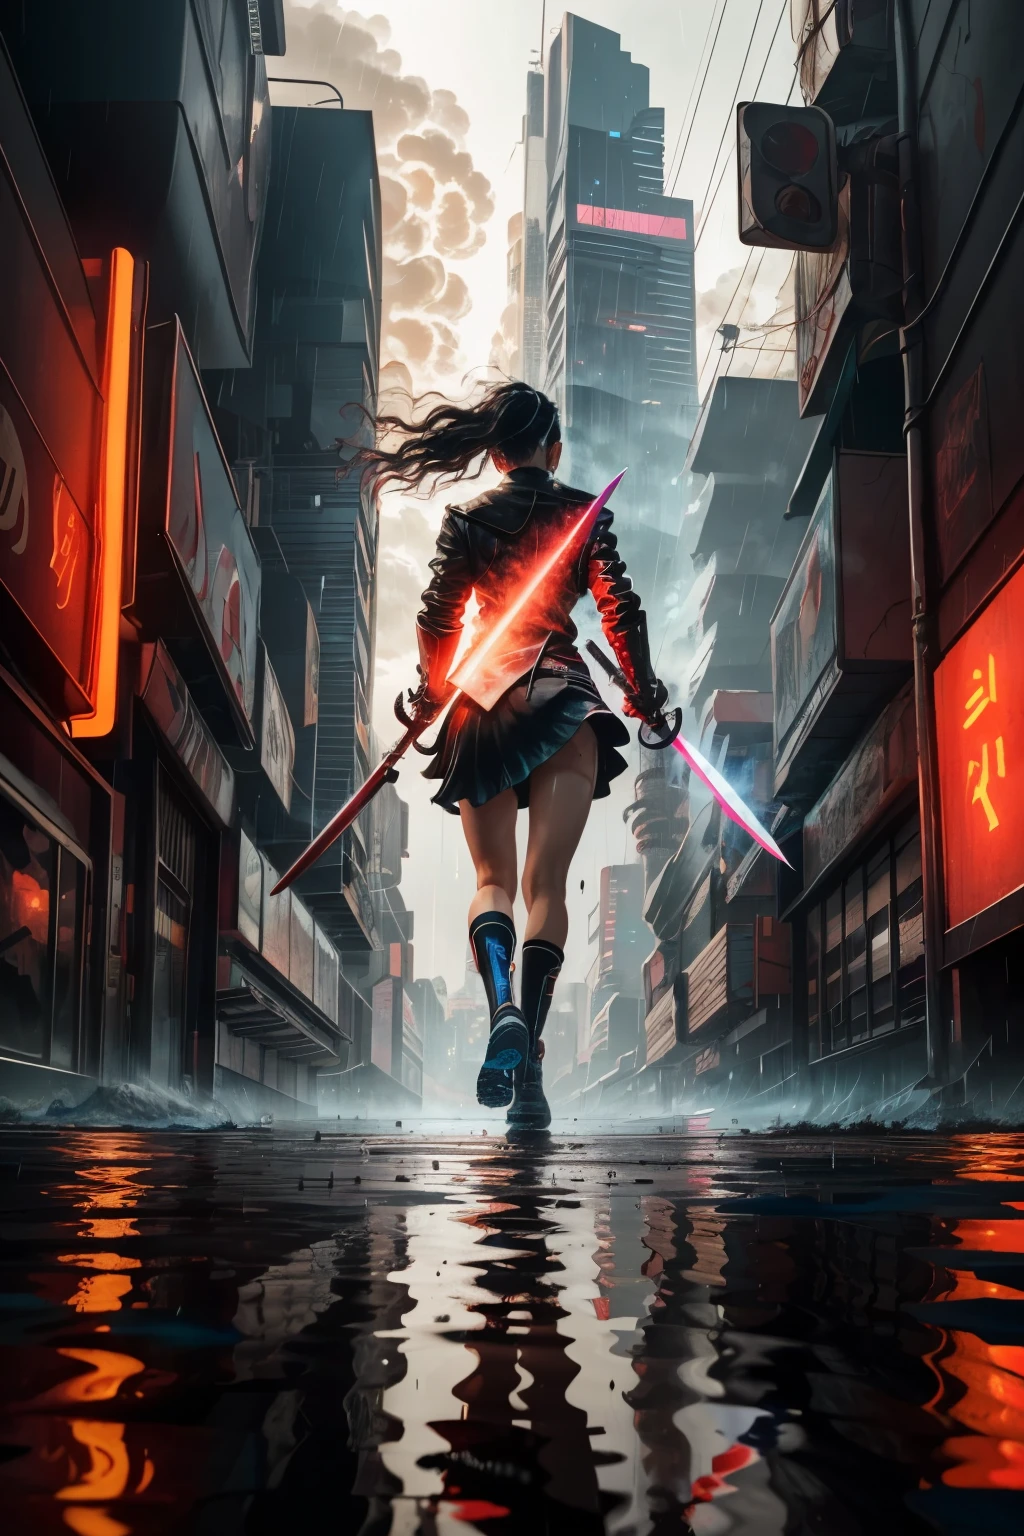 black hair, red eyes, determined expression, futuristic cityscape background, neon lights, rain, running pose, holding a sword, reflection in water, steam rising from the ground. [cyberpunk, sci-fi, anime, dynamic]